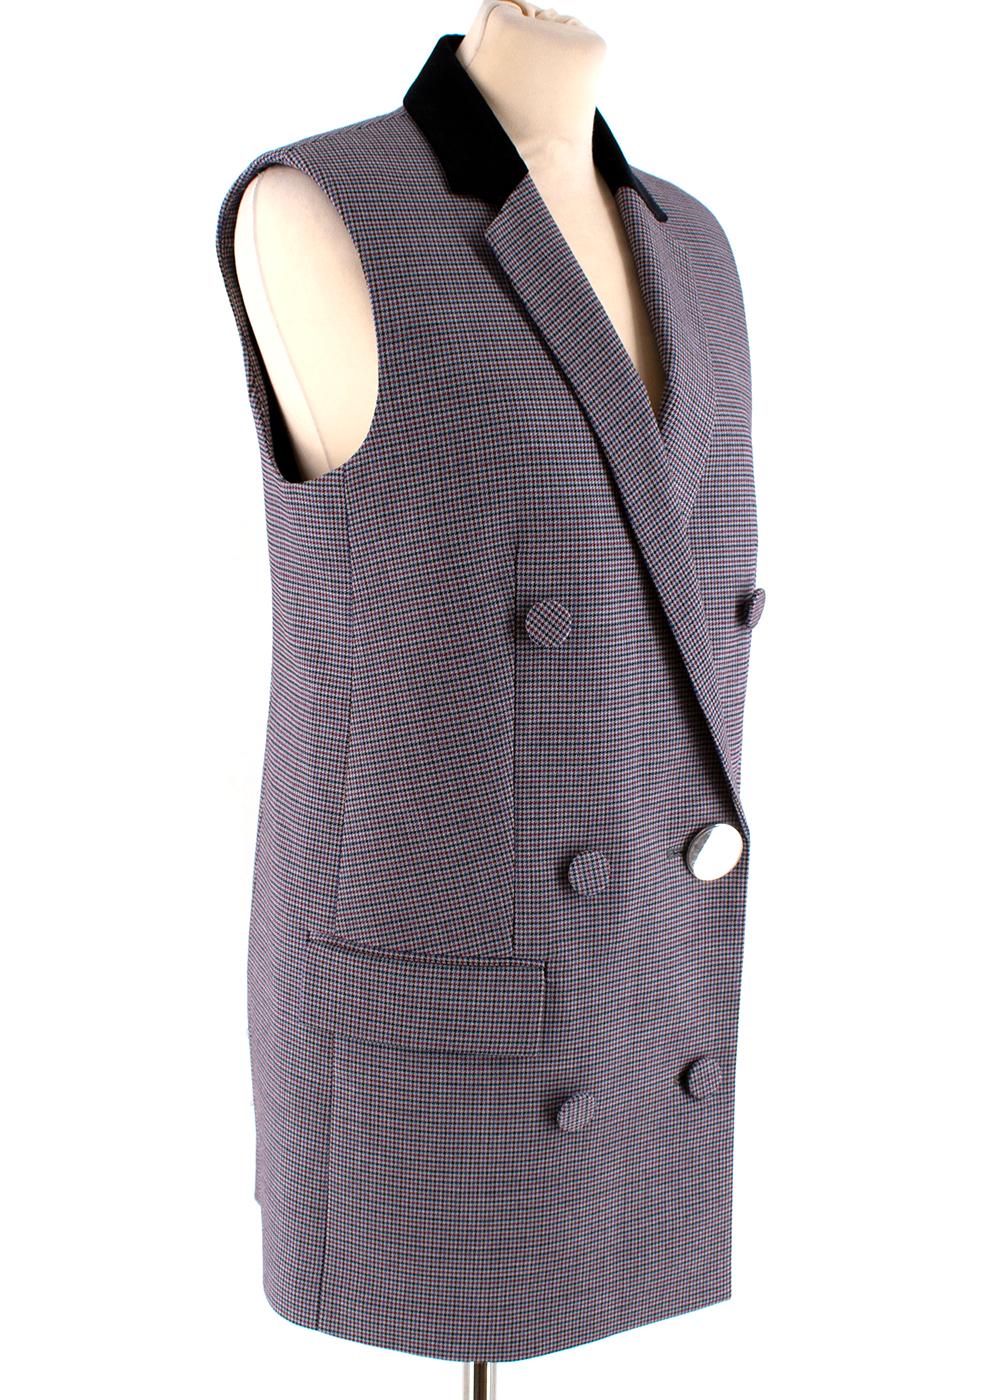 Alexander Wang Multicolor Houndstooth Sleeveless Blazer

- Velvet collar
- Notched lapel
- Fully lined
- Double breasted 
- Signature Alexander Wang silver button
- Faux pockets
- Back slit

Materials:
Body
- 52% Polyester
- 26% Viscose
- 20% Virgin